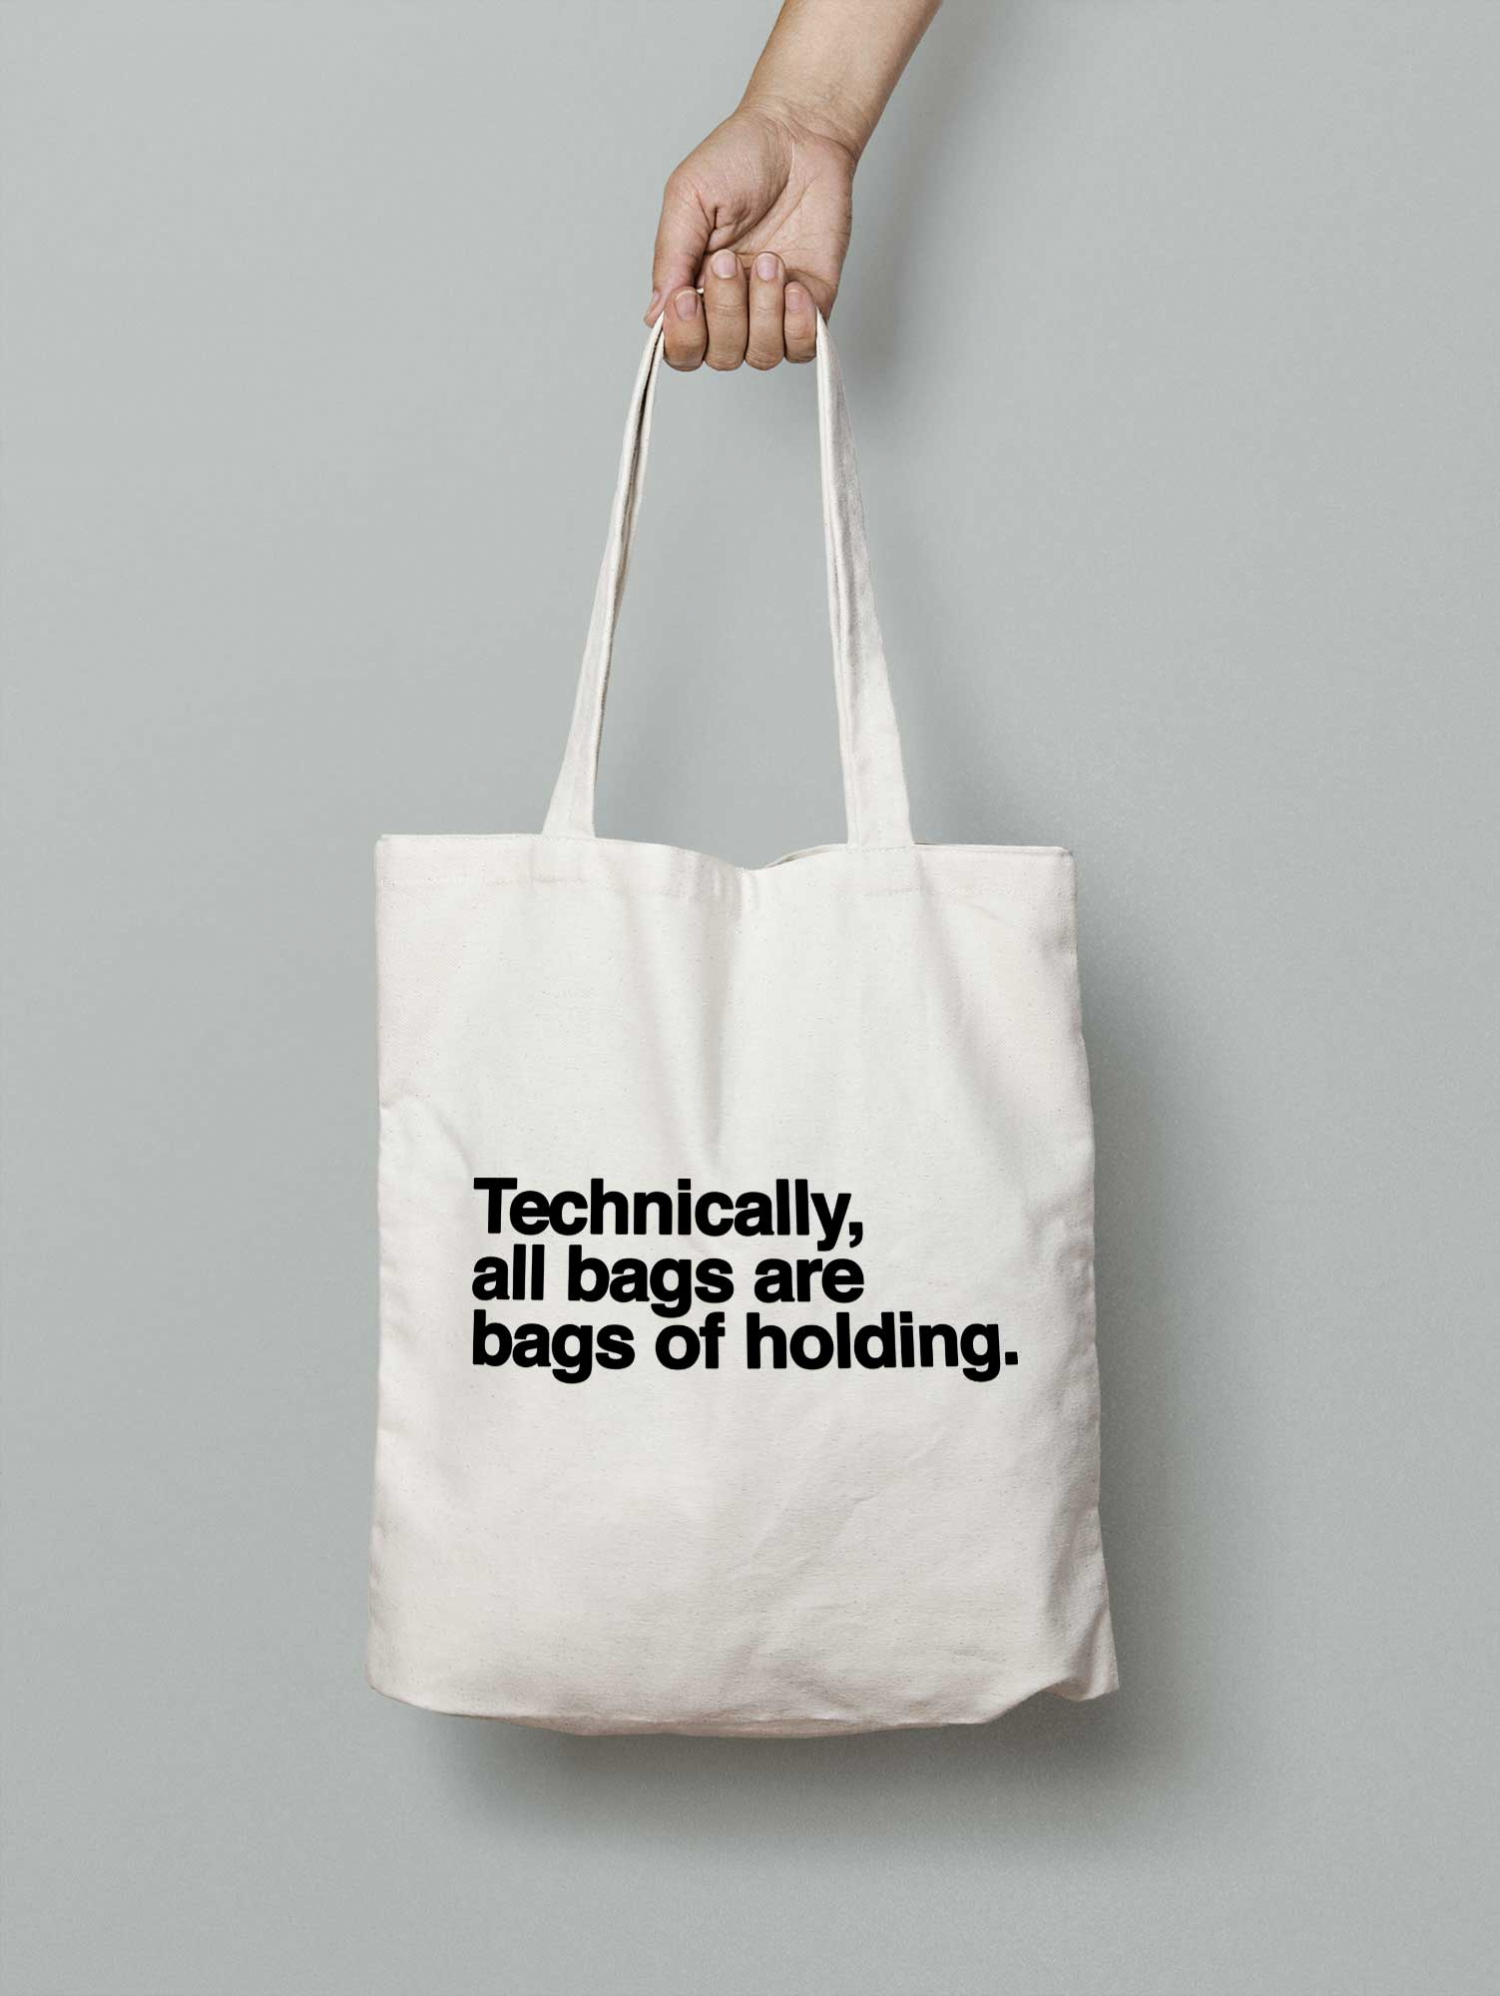 Technically, all bags are bags of holding.